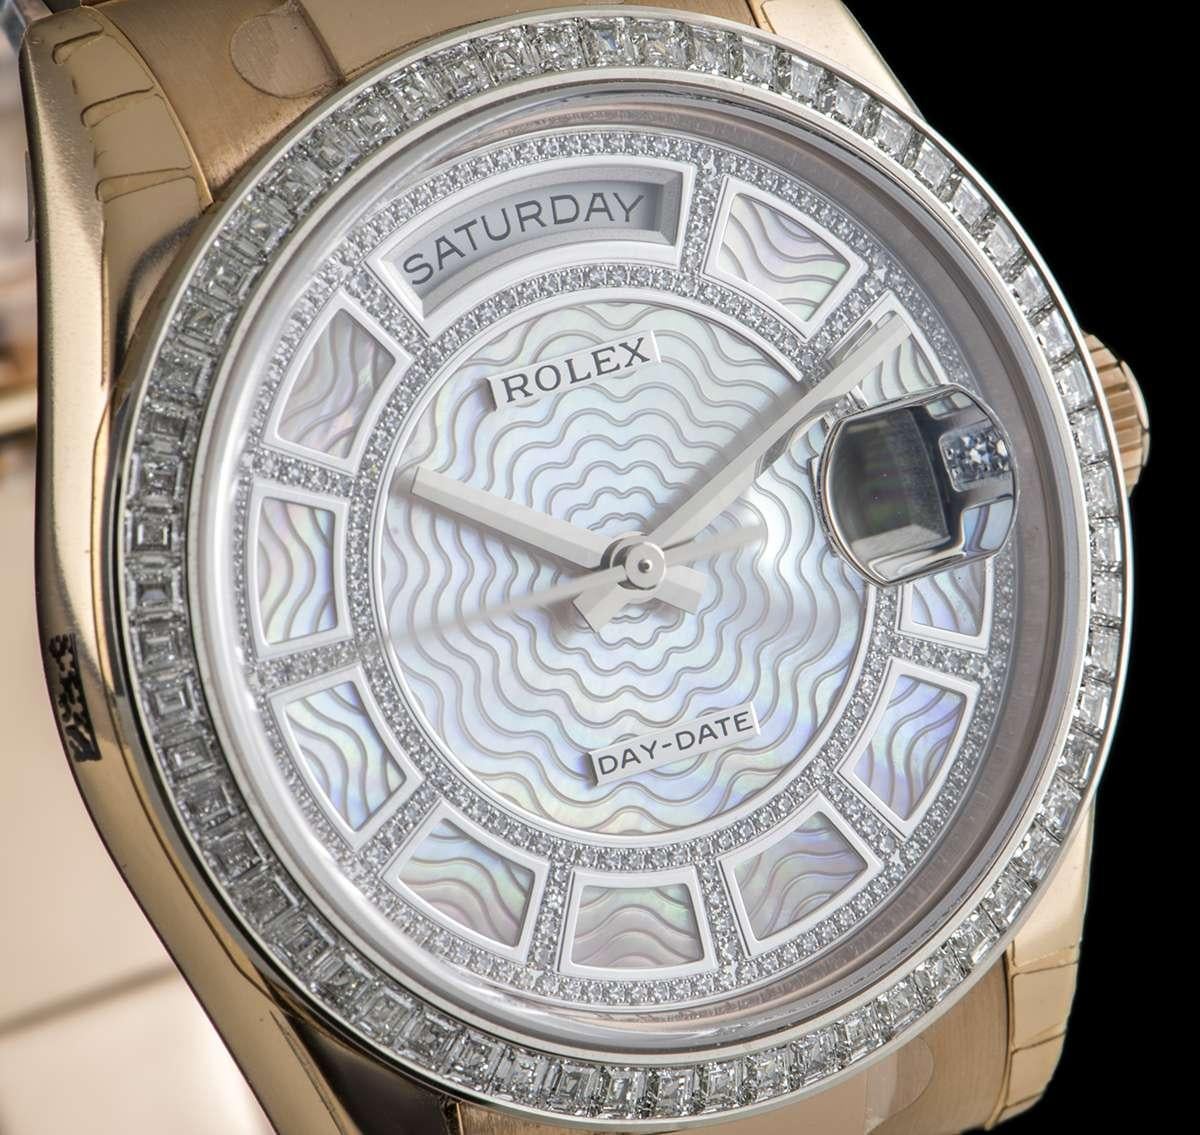 An Unworn 18k Rose Gold Day-Date Gents NOS 118395BR Wristwatch, pink mother of pearl carousel dial set with approximately 200 round brilliant cut diamonds, day at 12 0'clock, date at 3 0'clock, a fixed 18k white gold bezel set with approximately 60